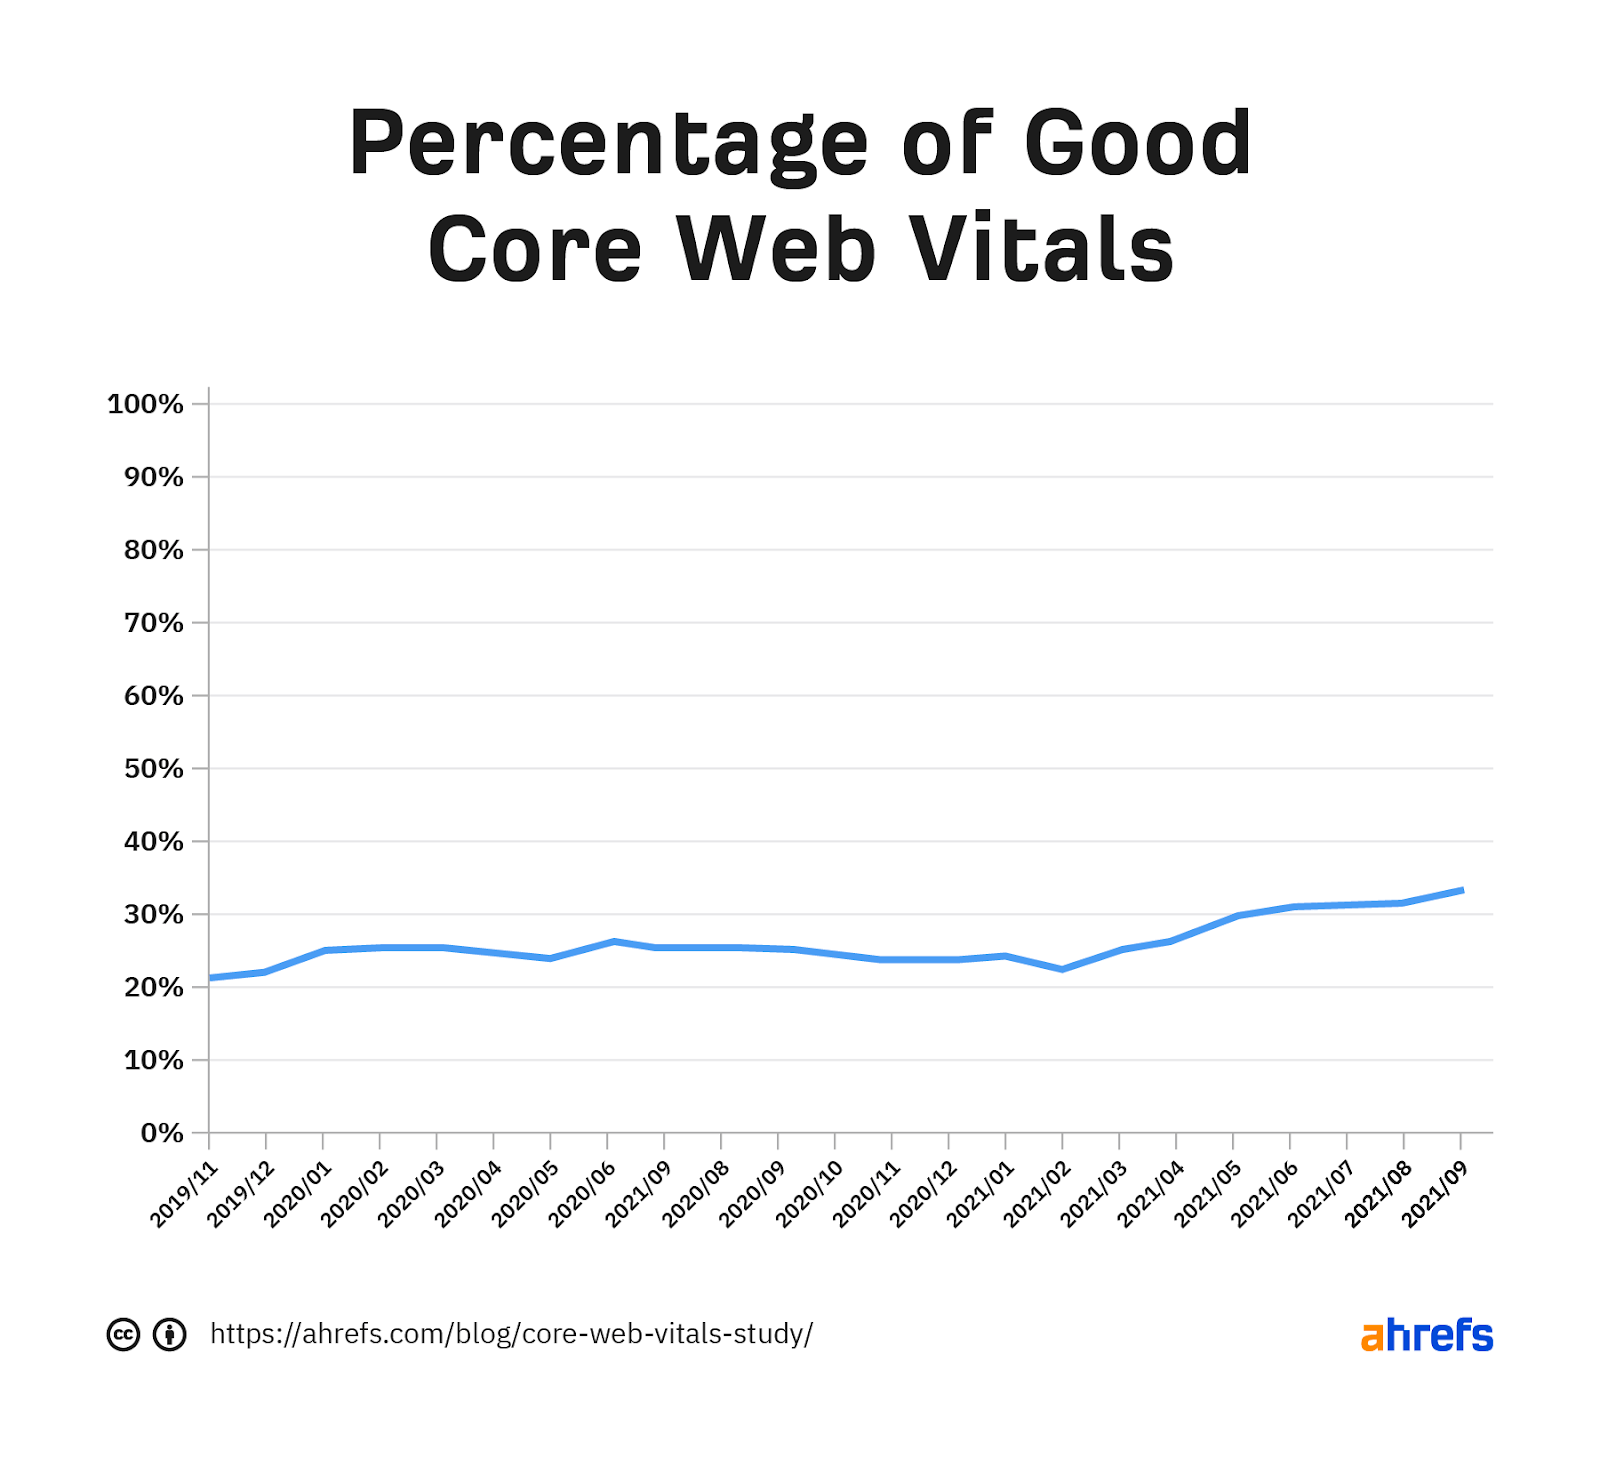 Graph showing percentage of good Core Web Vitals over time